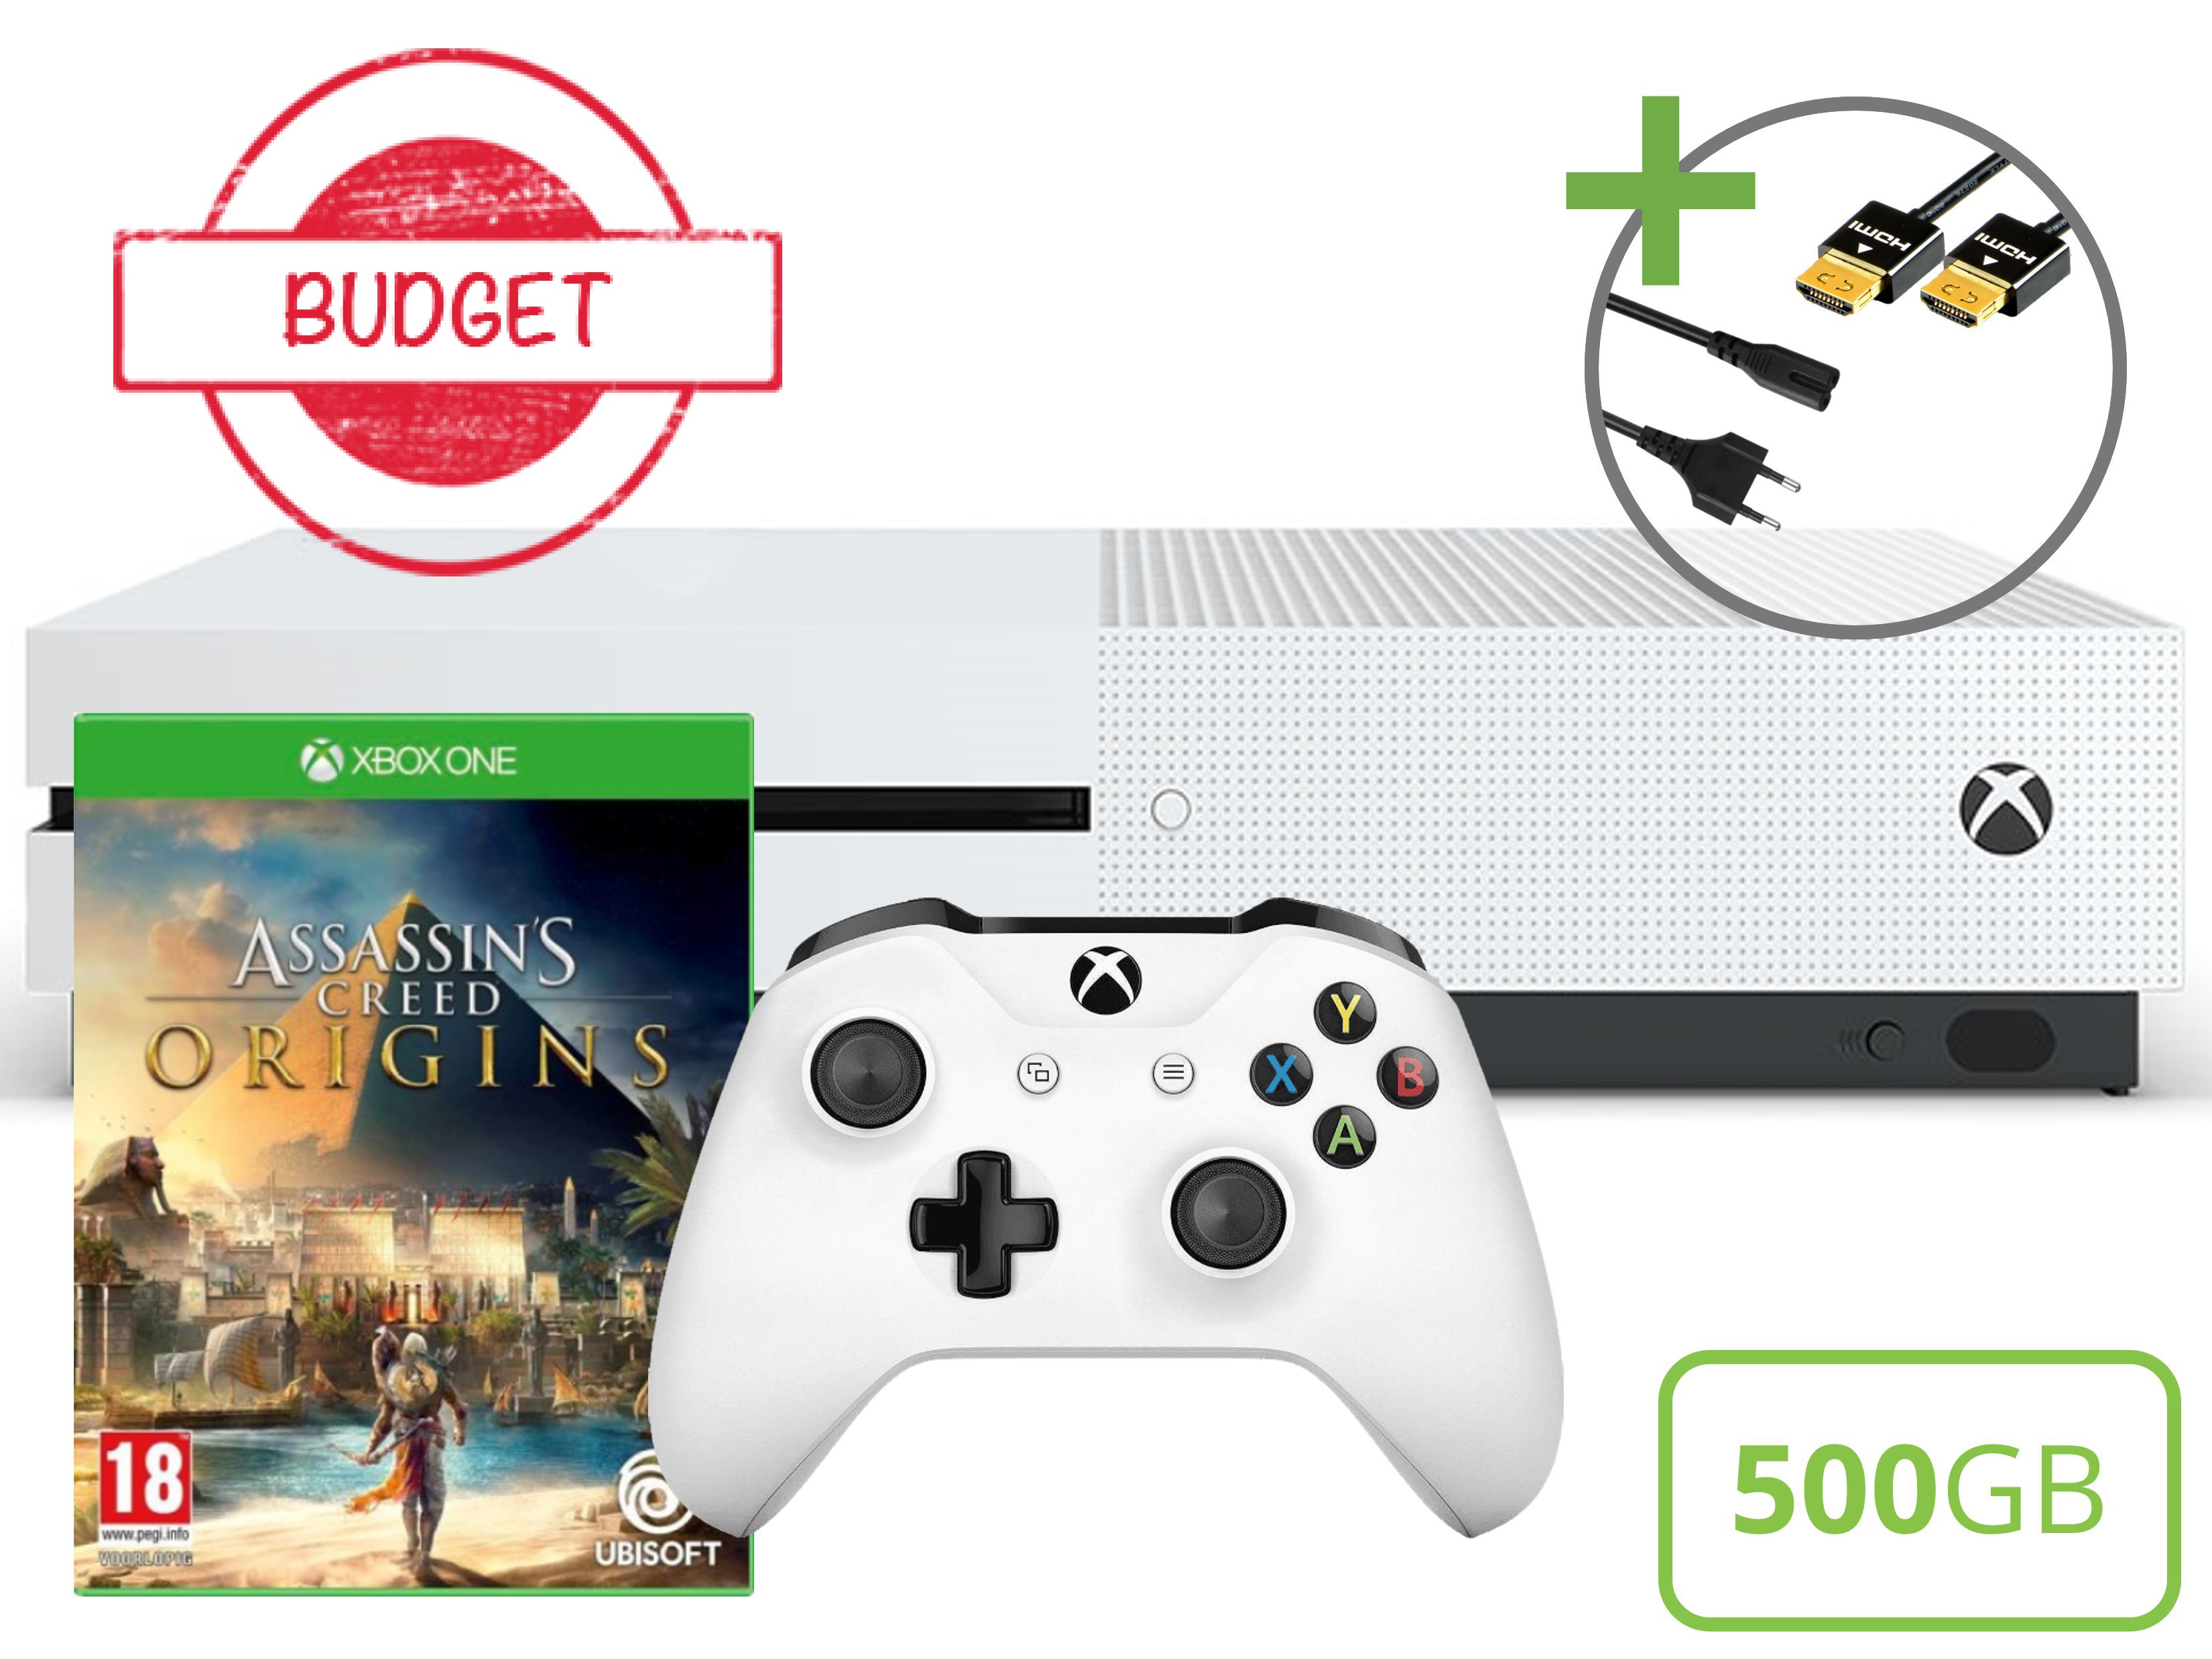 Microsoft Xbox One S Starter Pack - 500GB Assassin's Creed Origins Edition - Budget Kopen | Xbox One Hardware